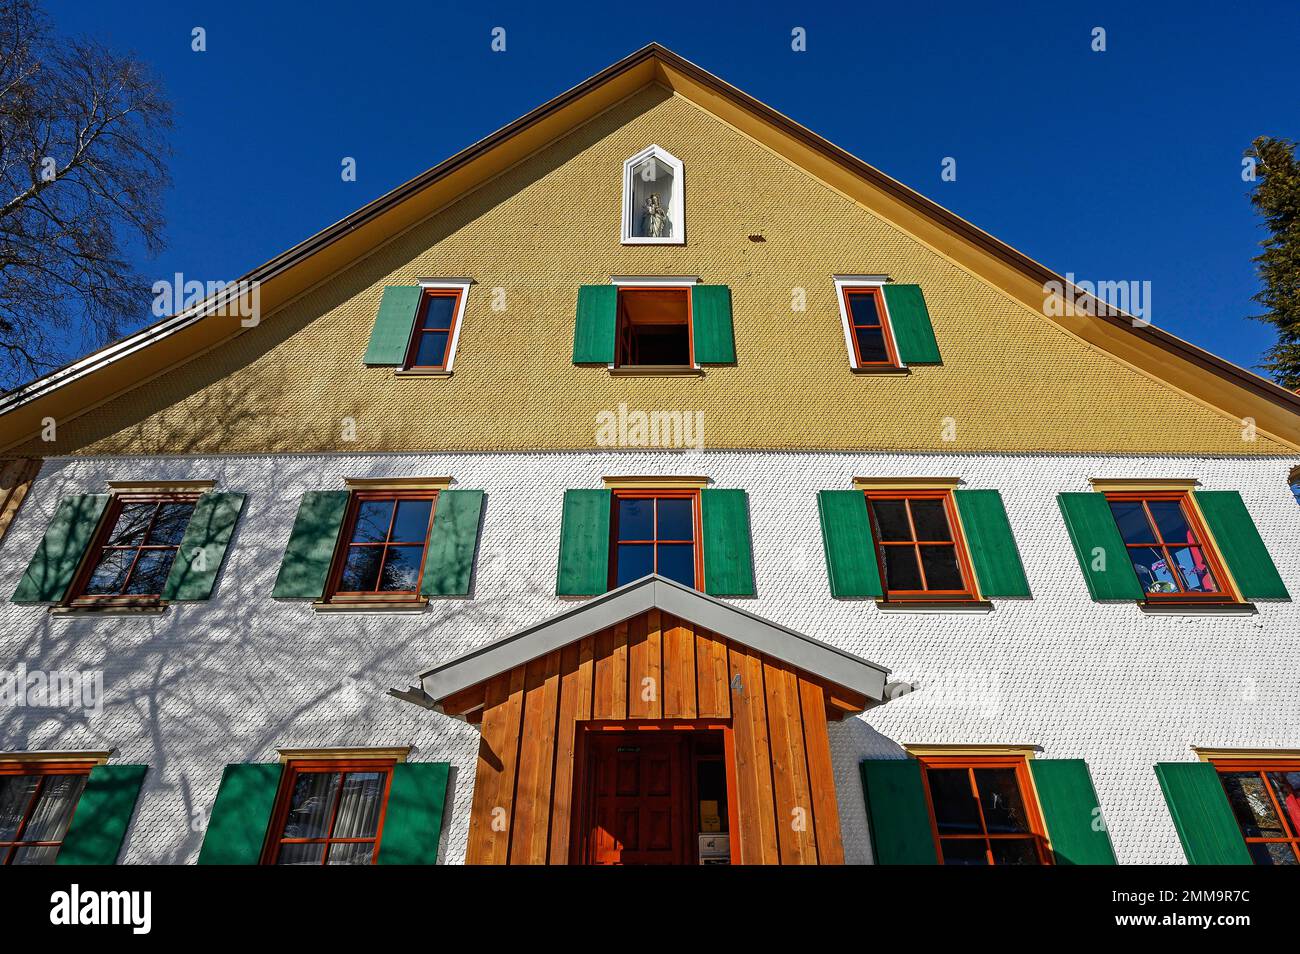 Facade with wooden shingles and figure of the Virgin Mary, Rechtis, Allgaeu, Bavaria, Germany Stock Photo